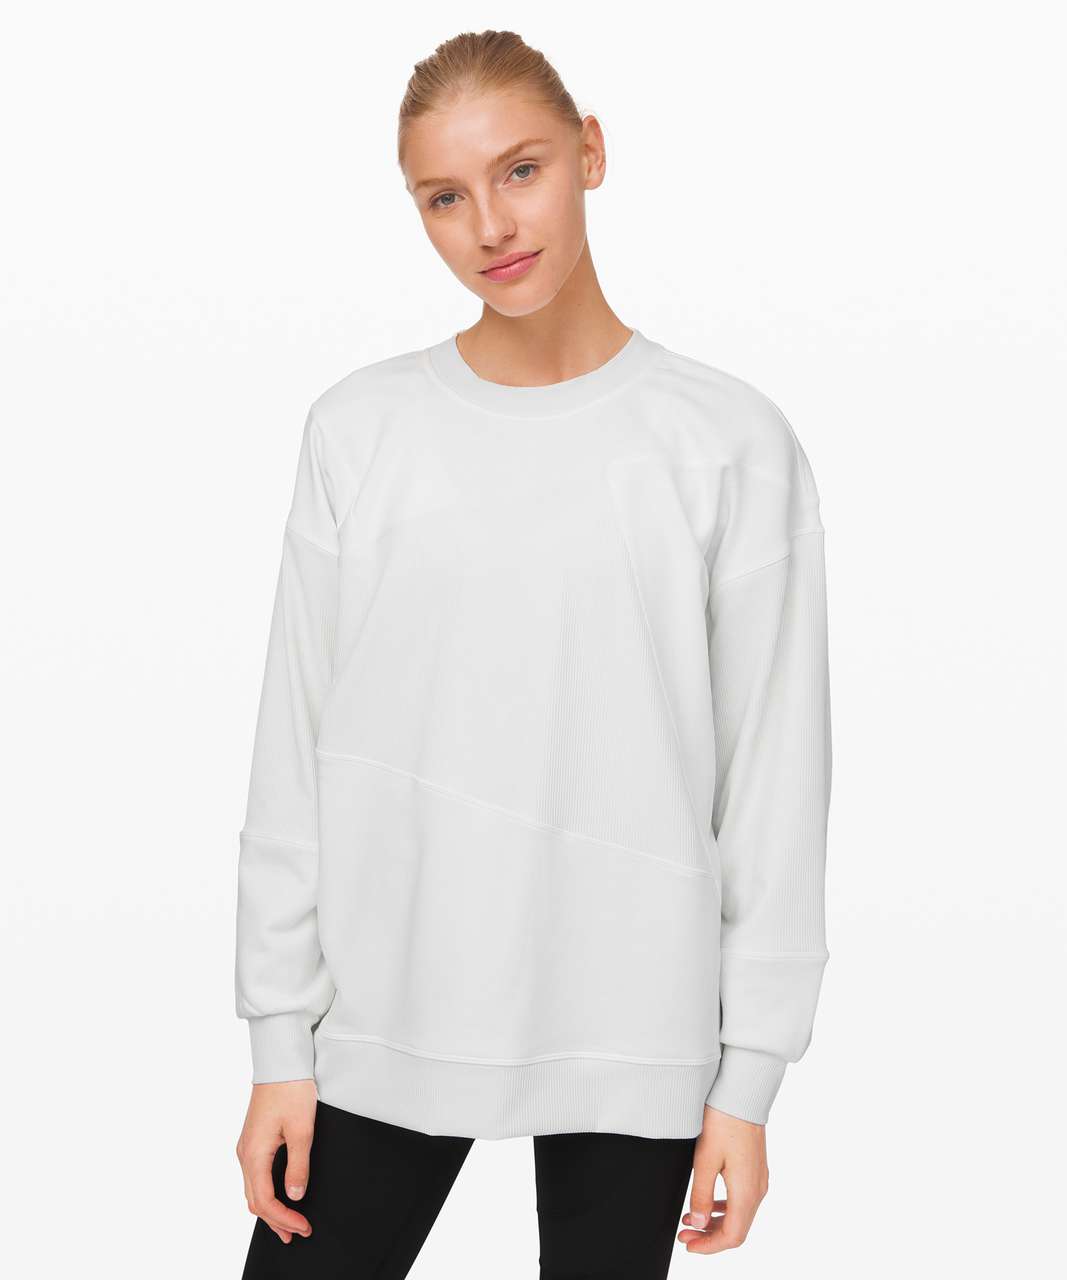 Lululemon Perfectly Oversized Crew - White (First Release)